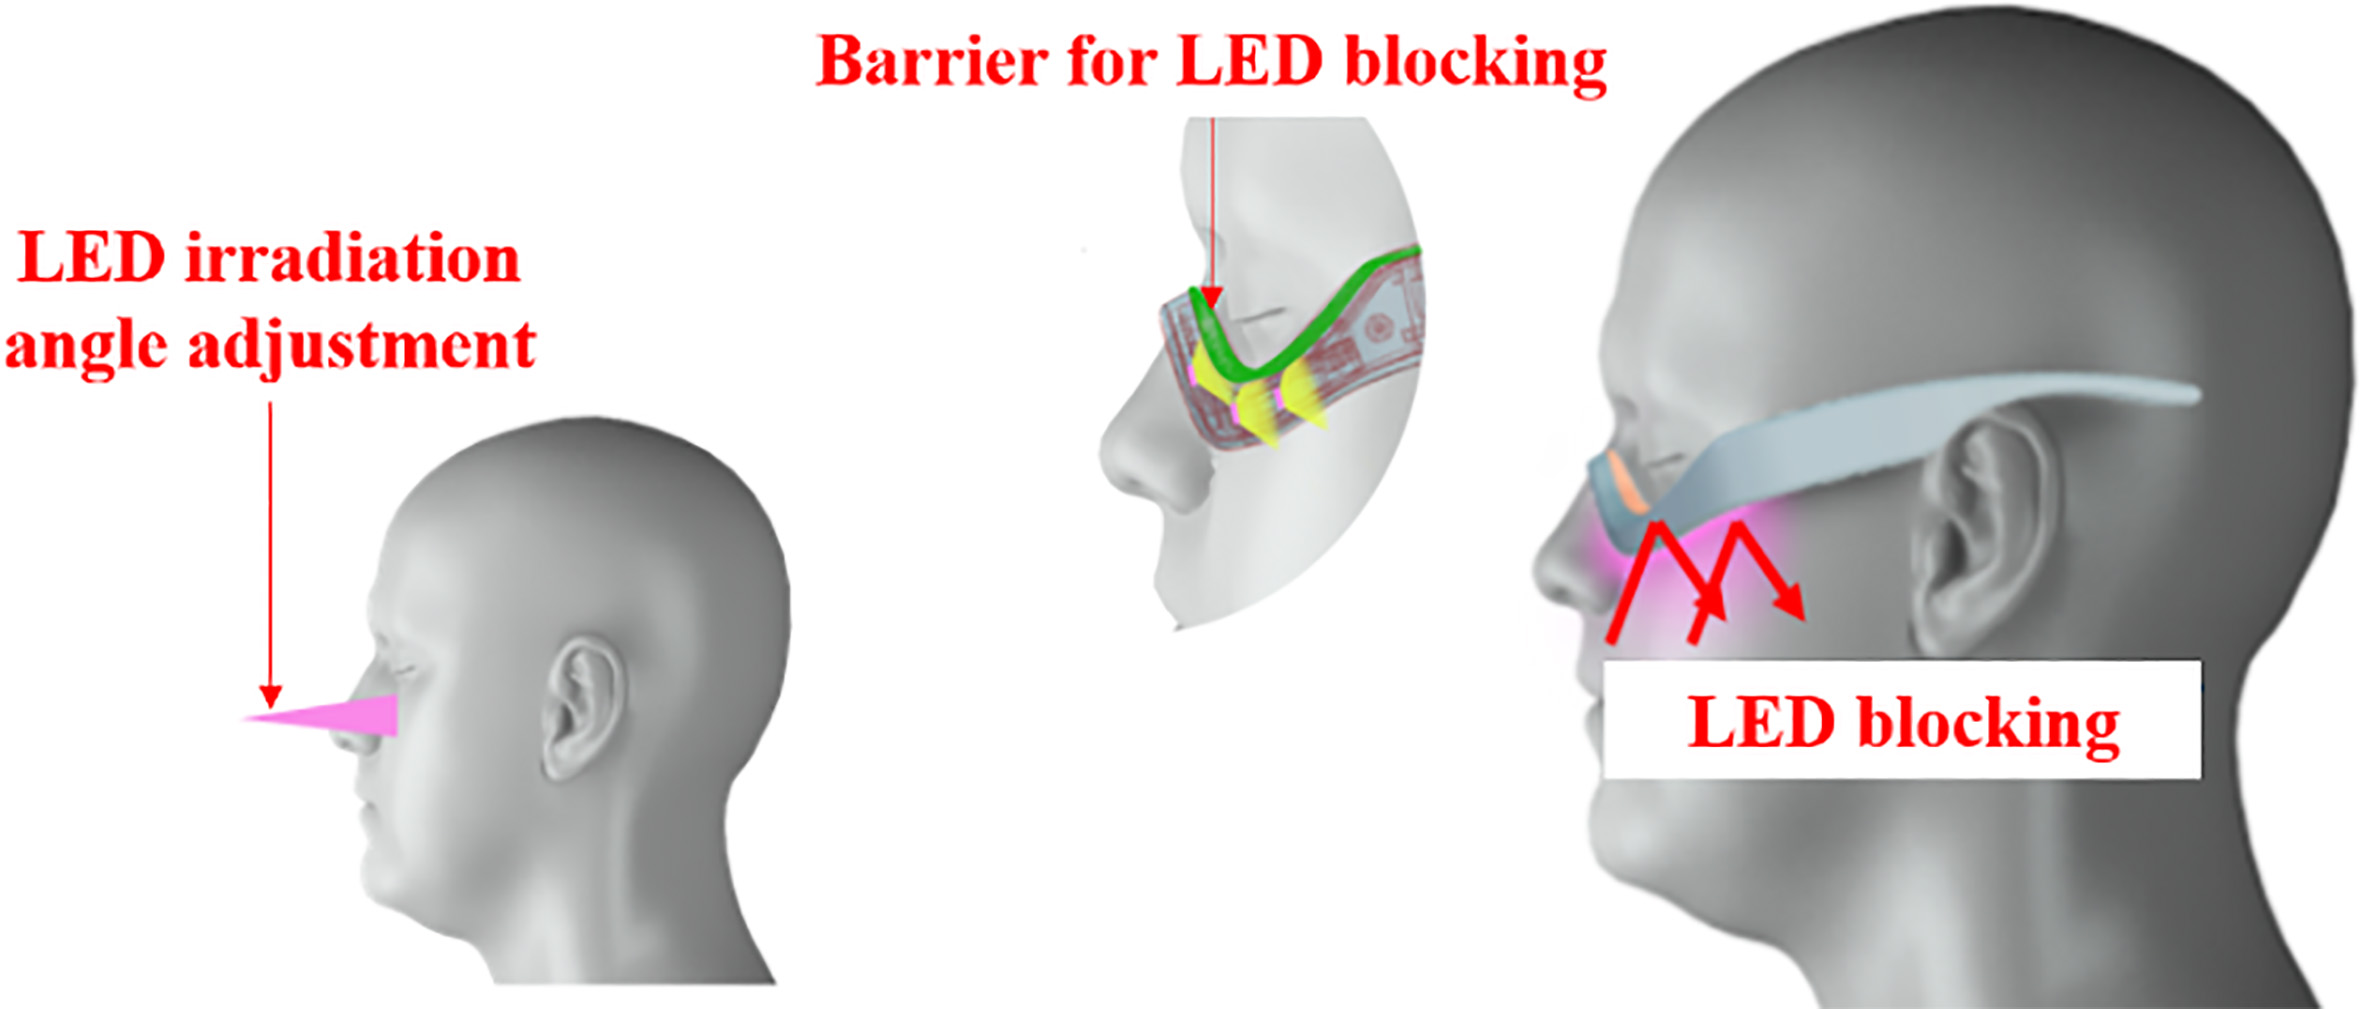 LED blocking barrier for the mechanical 3D design, prototype, and LED wavelength performance test.